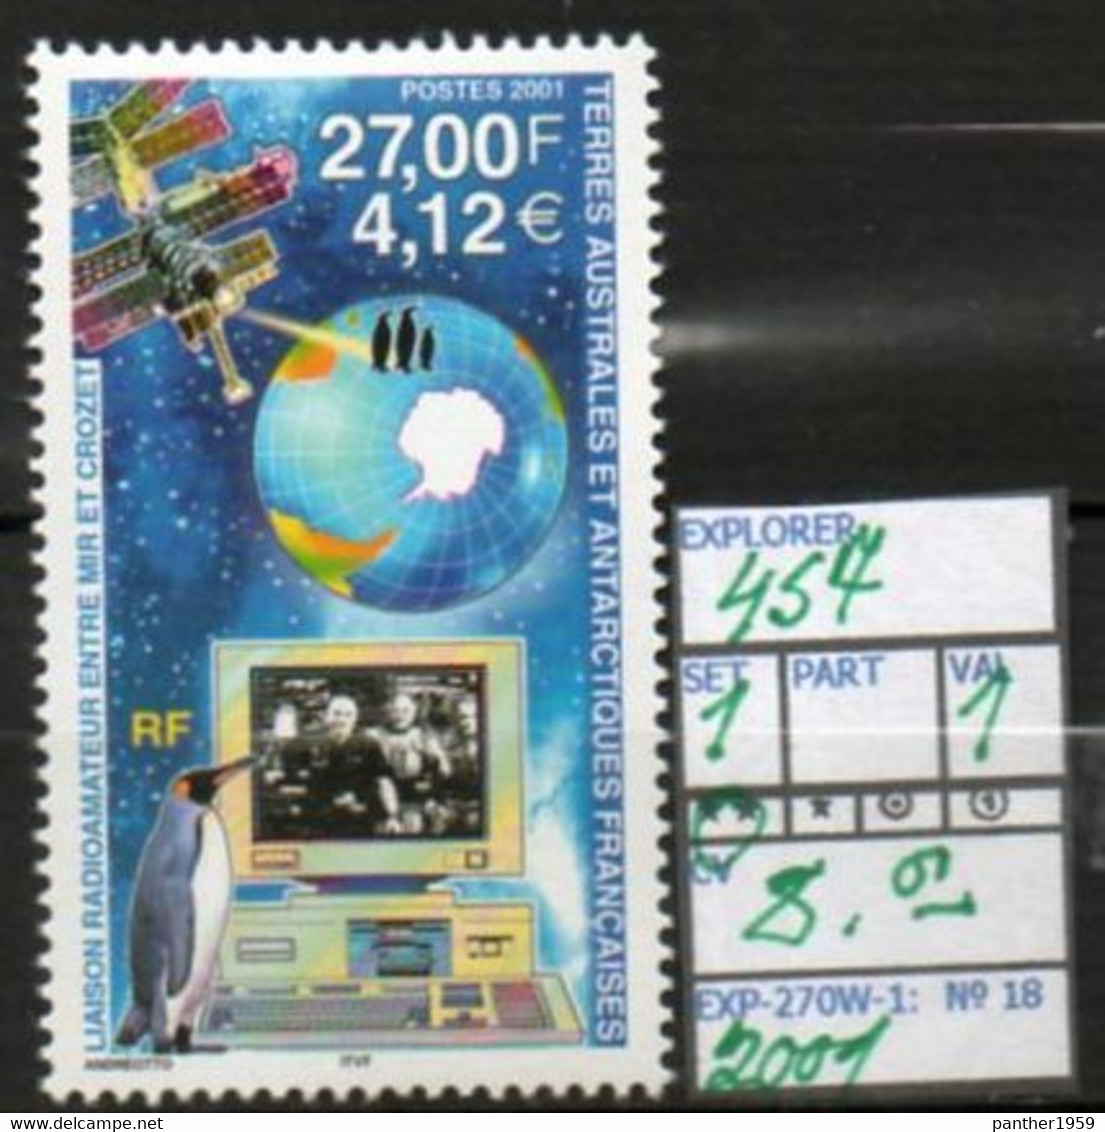 OCEANIA>FRENCH ANTARTIC#T.A.A.F.#EXPLORING ARTIC-POLAR# MNH** (EXP-270W-1 (18) - Research Programs